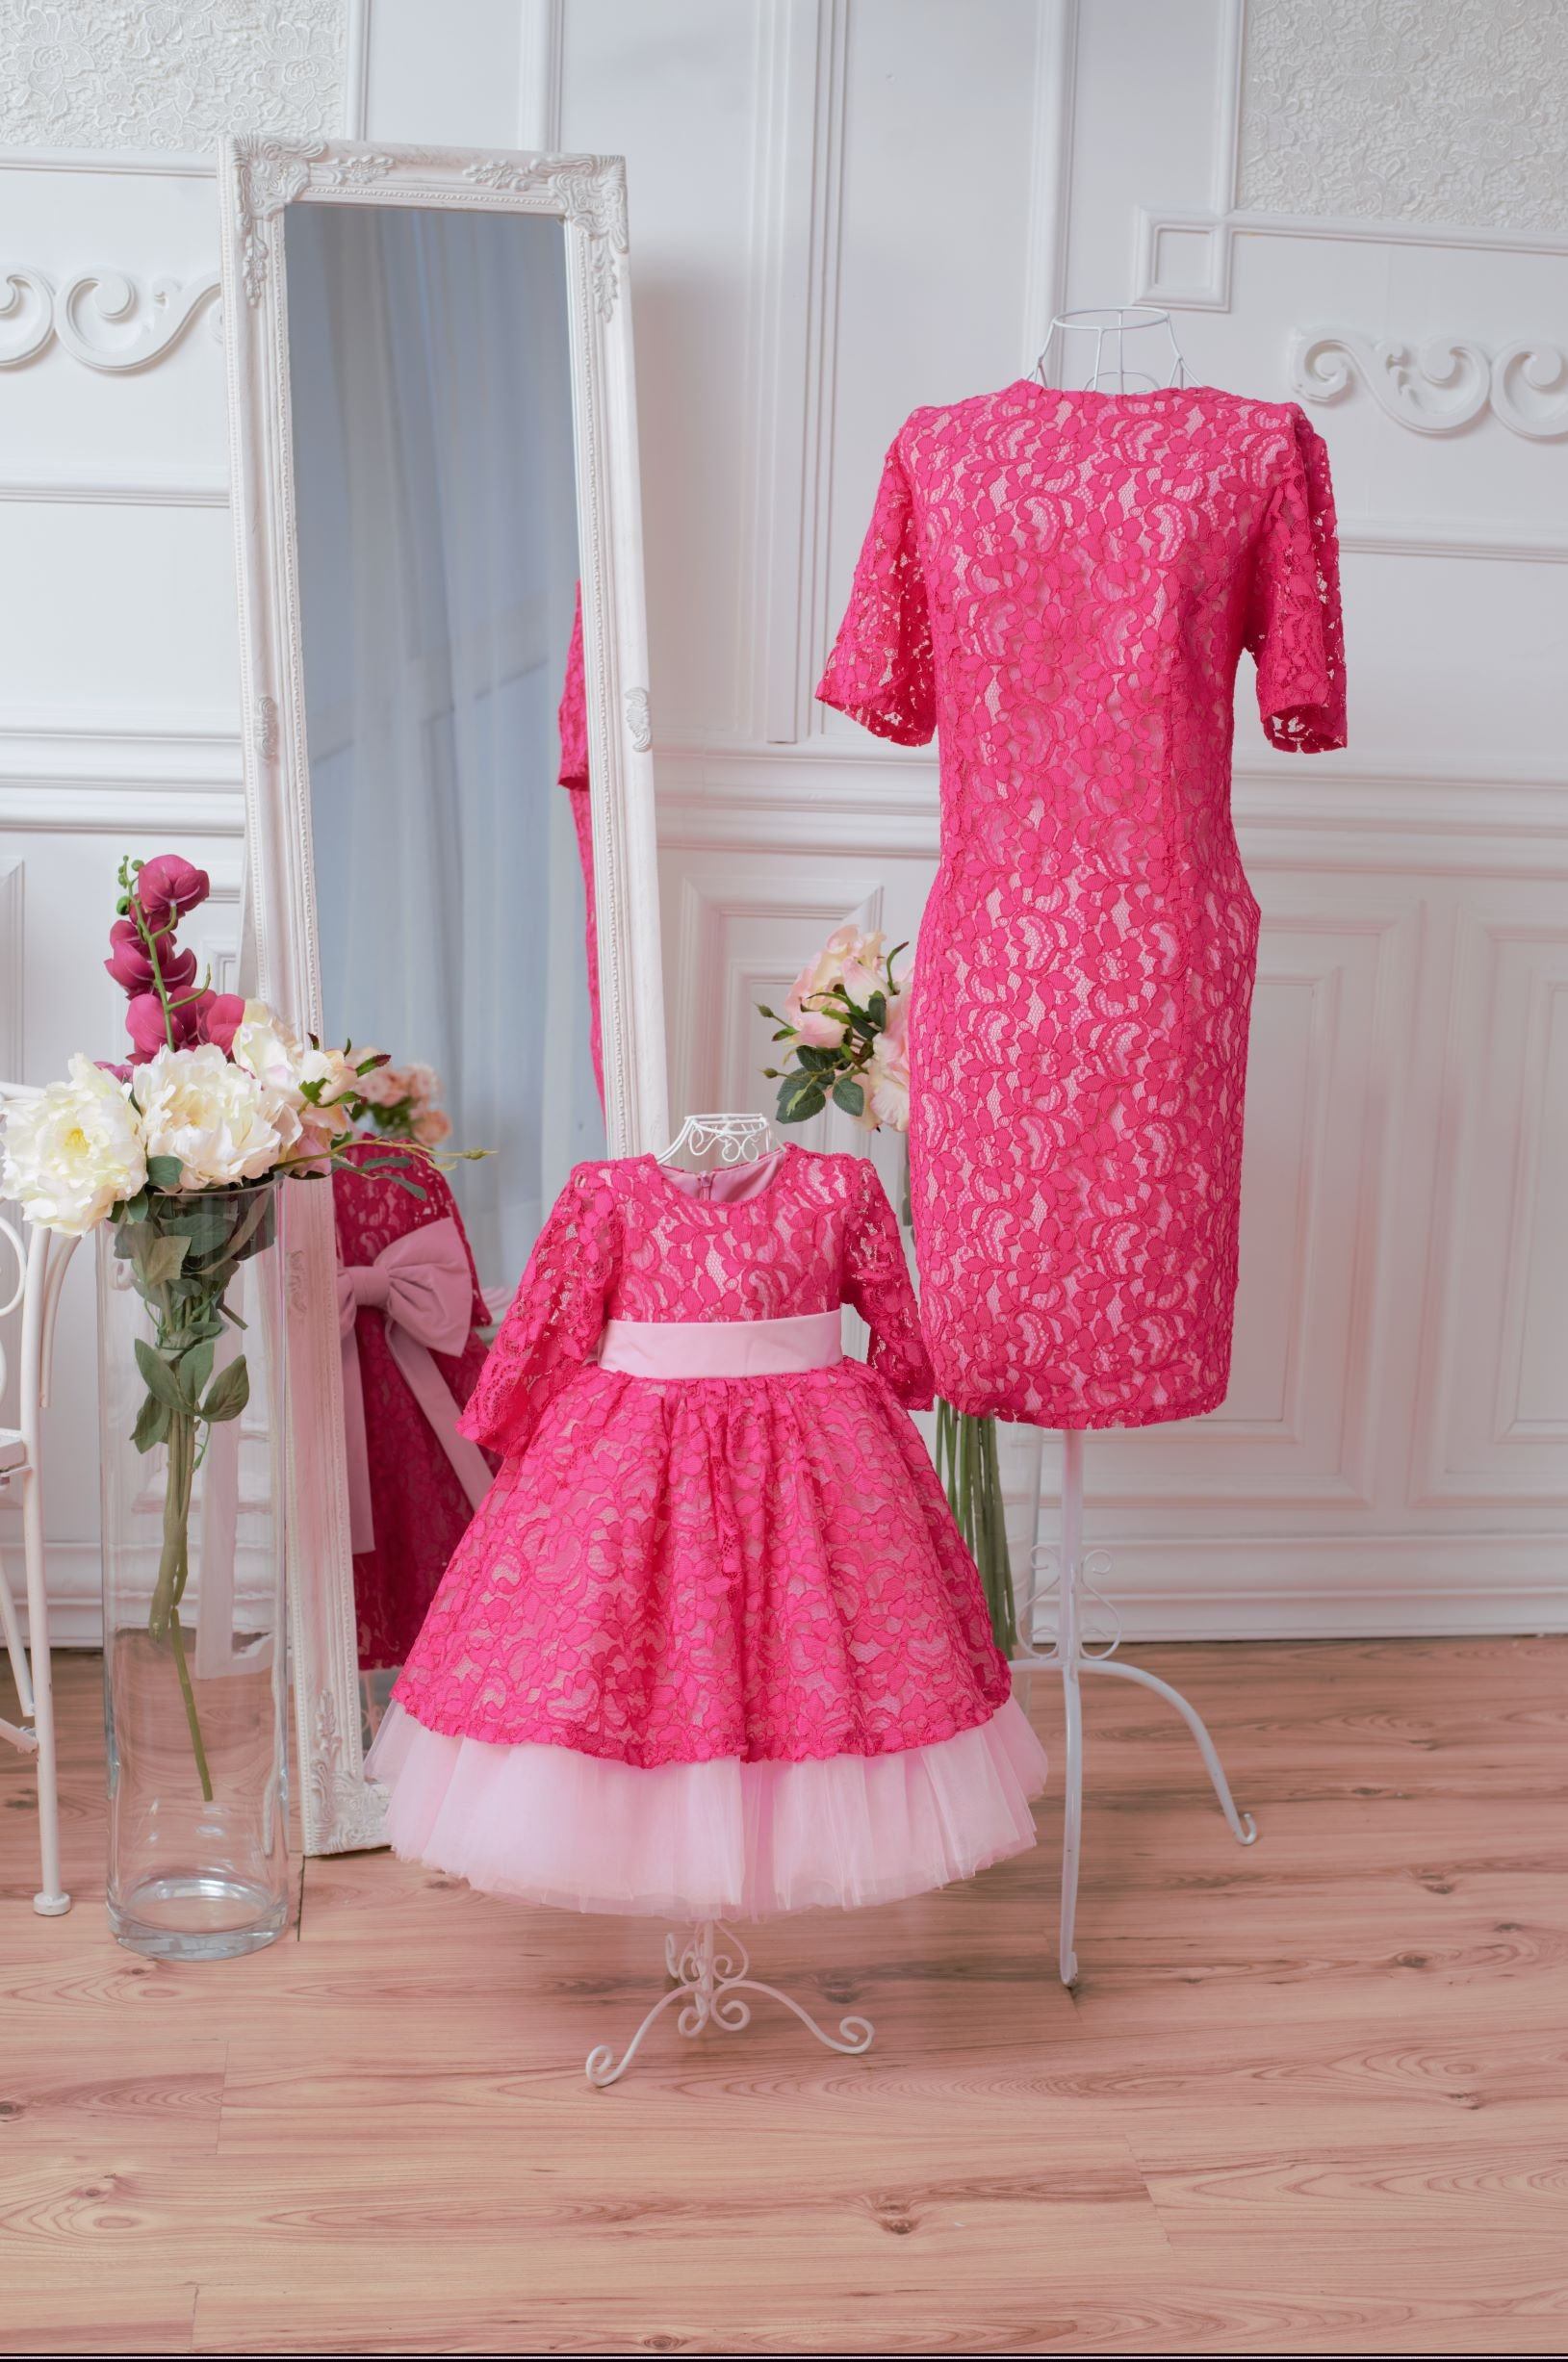 Mother Daughter Matching Dress, Birthday Dress for Woman, Matching Outfit,  First Birthday Dress for Photoshoot, Family Outfits for a Wedding - Etsy | Mother  daughter matching outfits, Mother daughter dresses matching, Mother